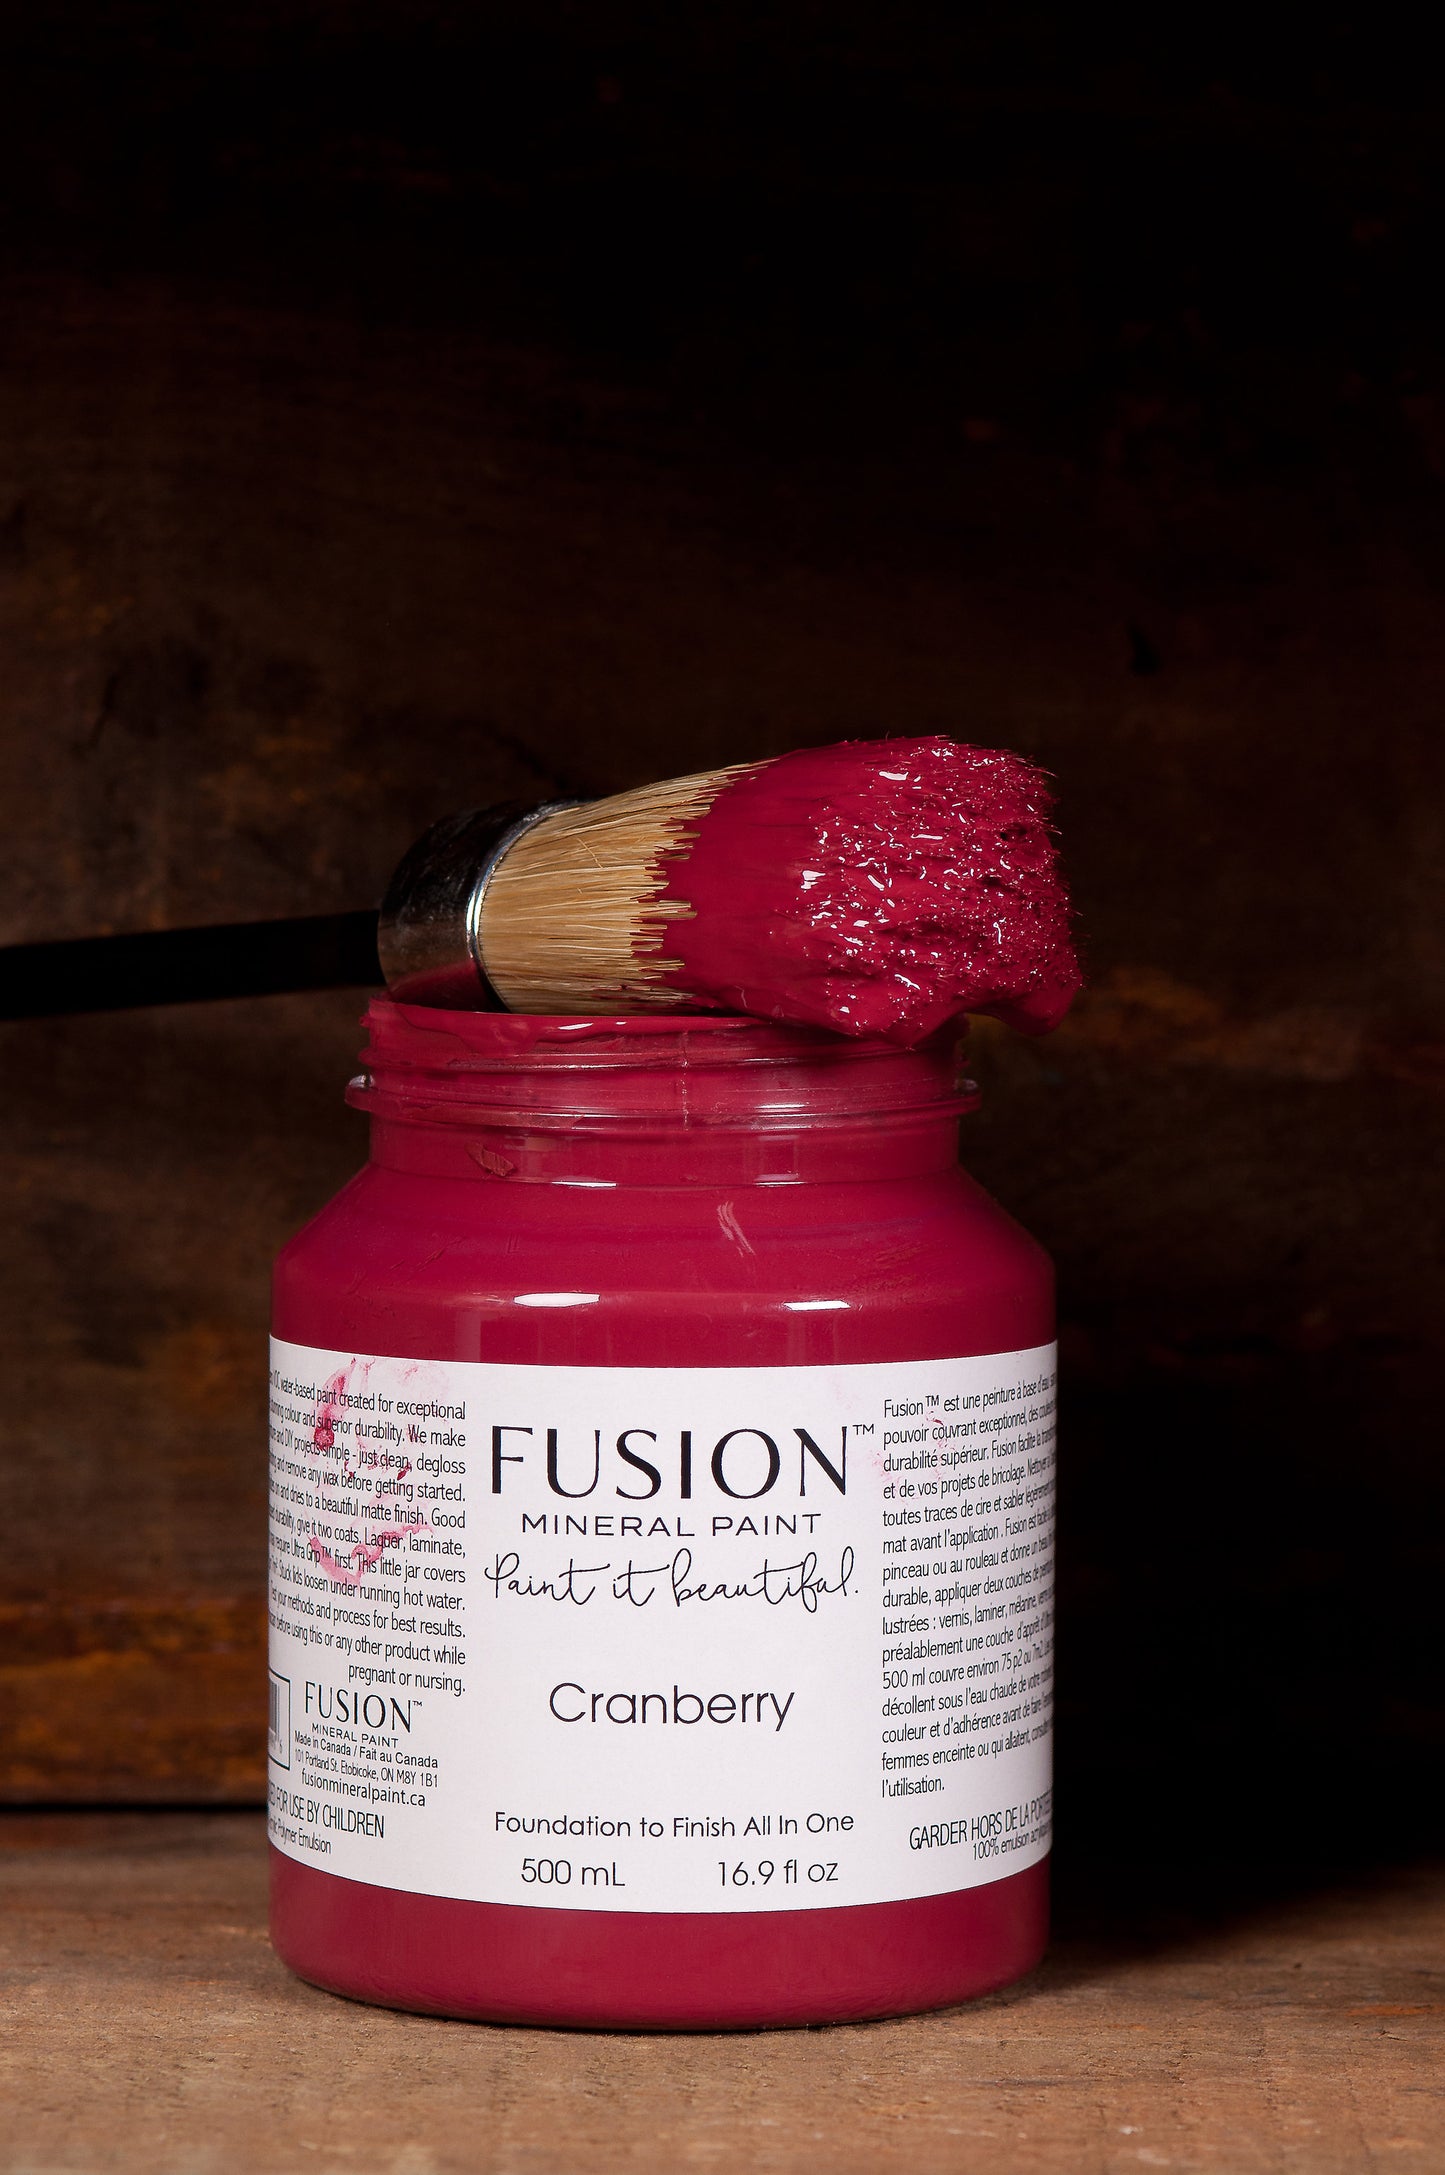 Cranberry by Fusion